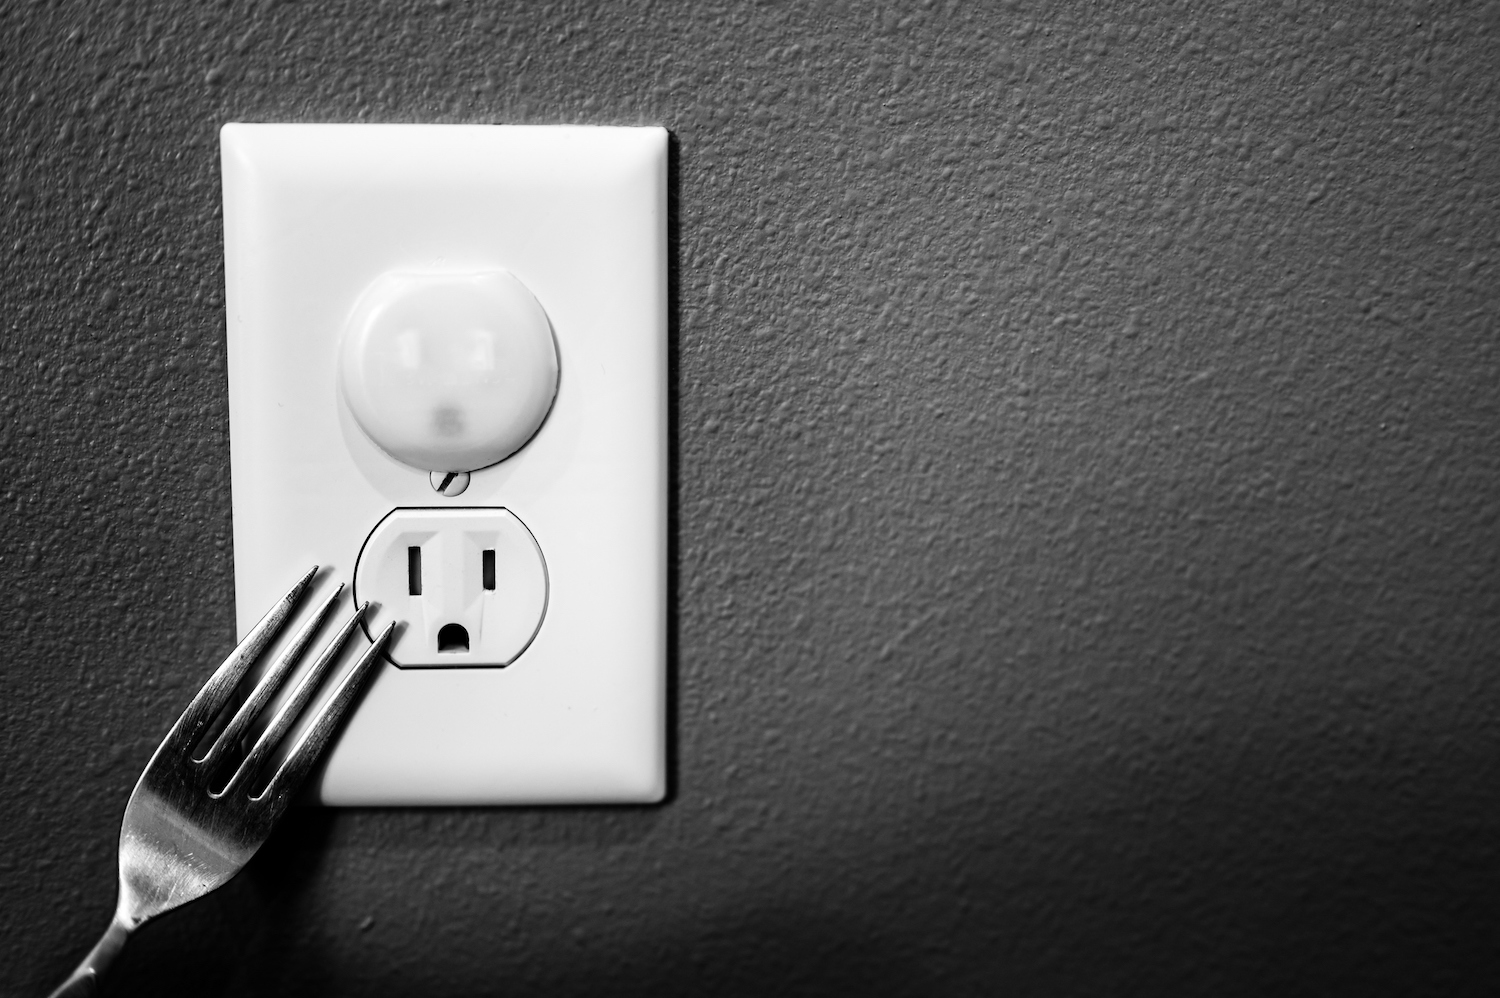 Concept of risks and hazards associated with uncovered electrical outlets with a sharp metal object that can be inserted and cause a shock.